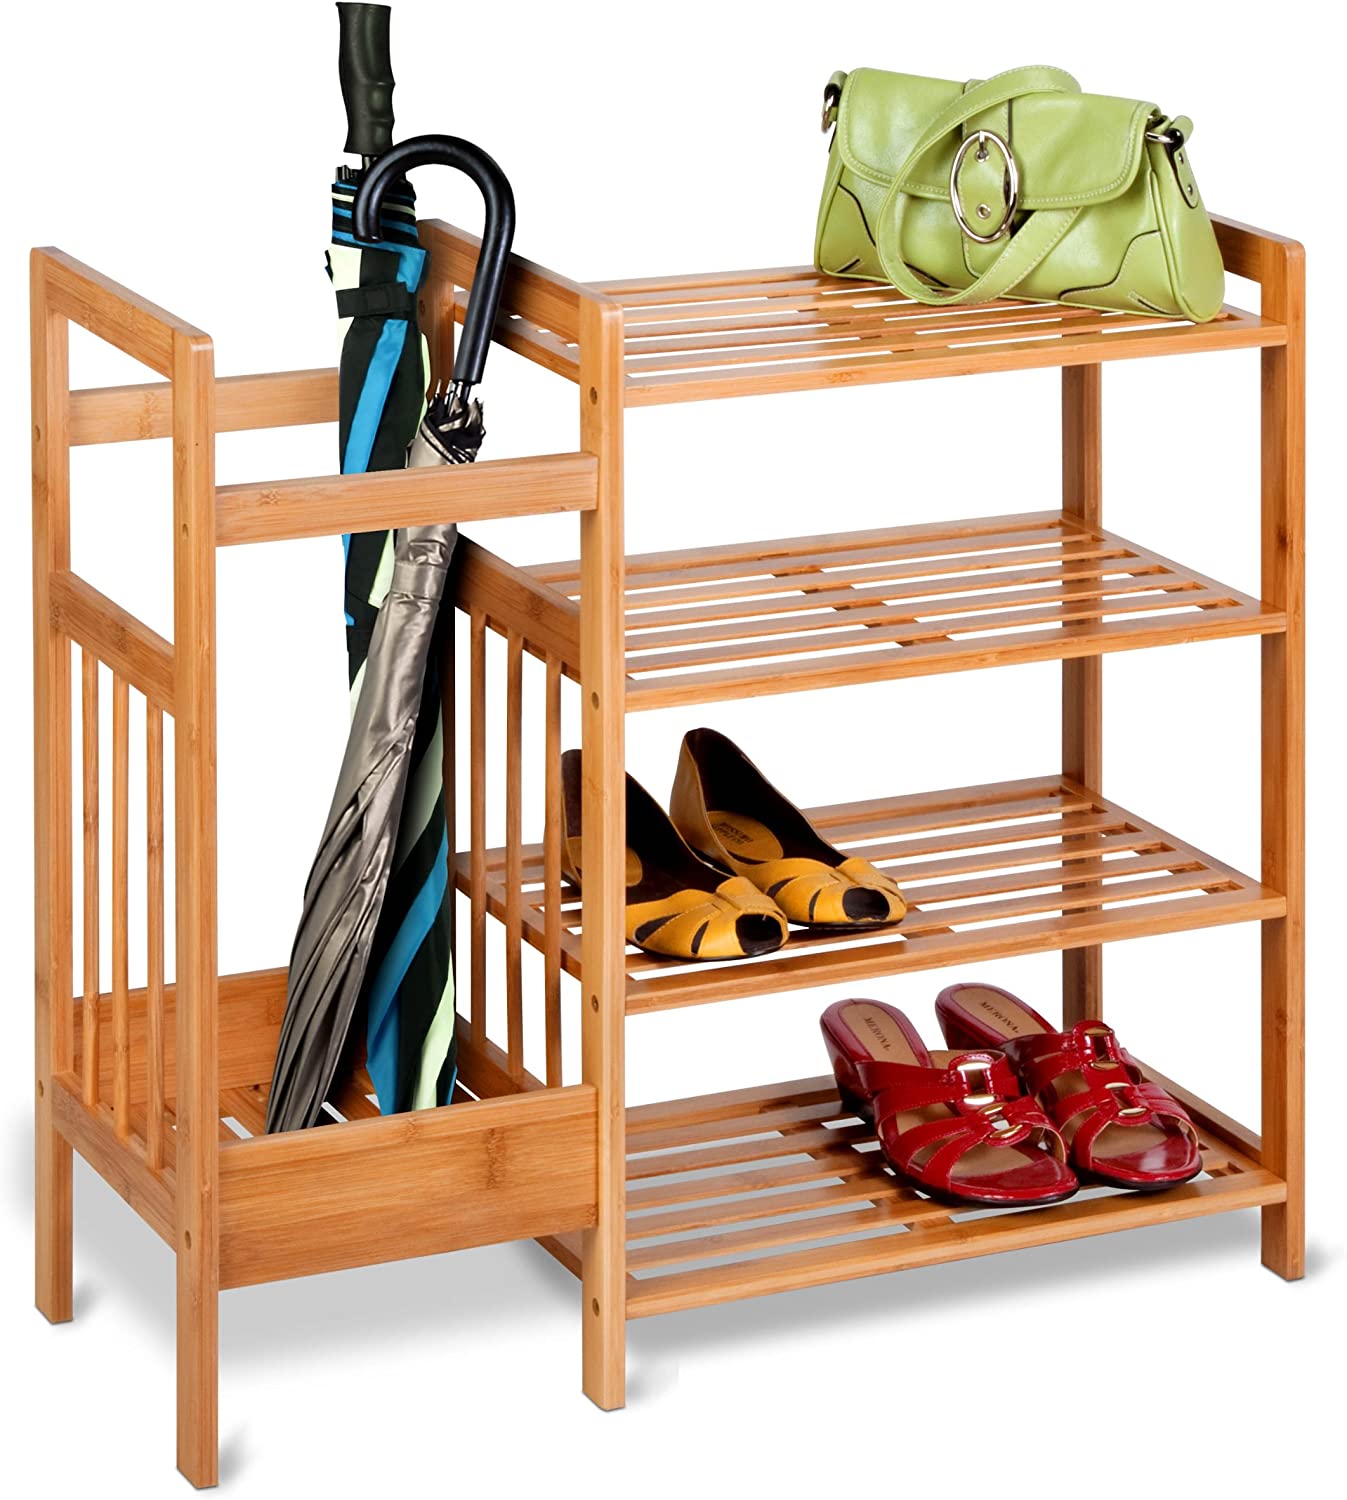 Bamboo organizer with shoes and umbrellas